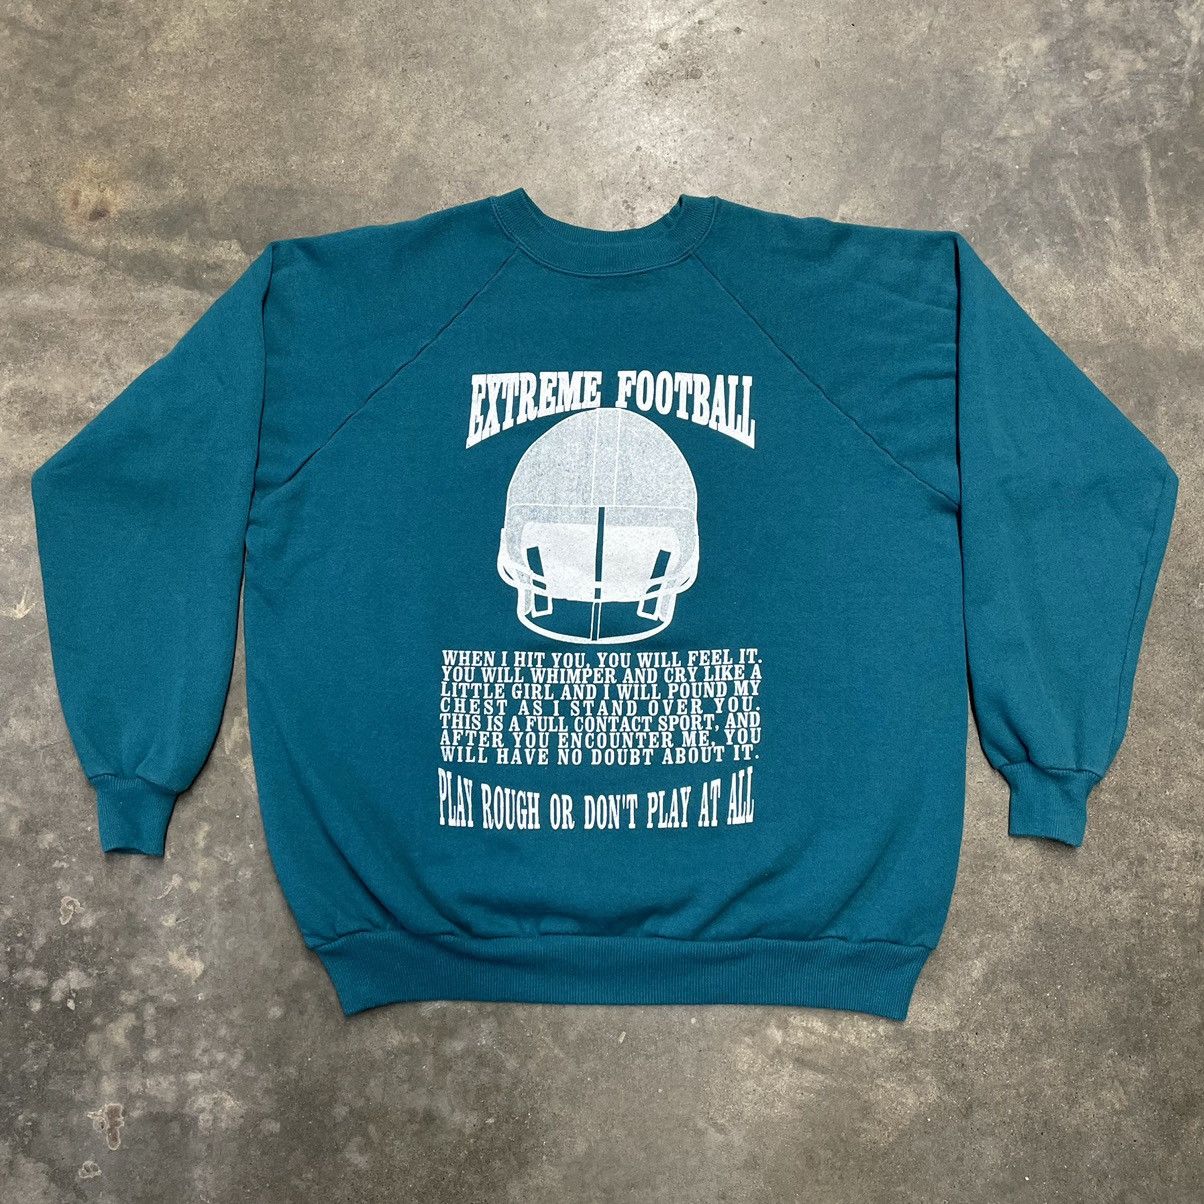 Vintage Vintage Made In USA Extreme Football Comedy Crewneck Large Size US L / EU 52-54 / 3 - 2 Preview